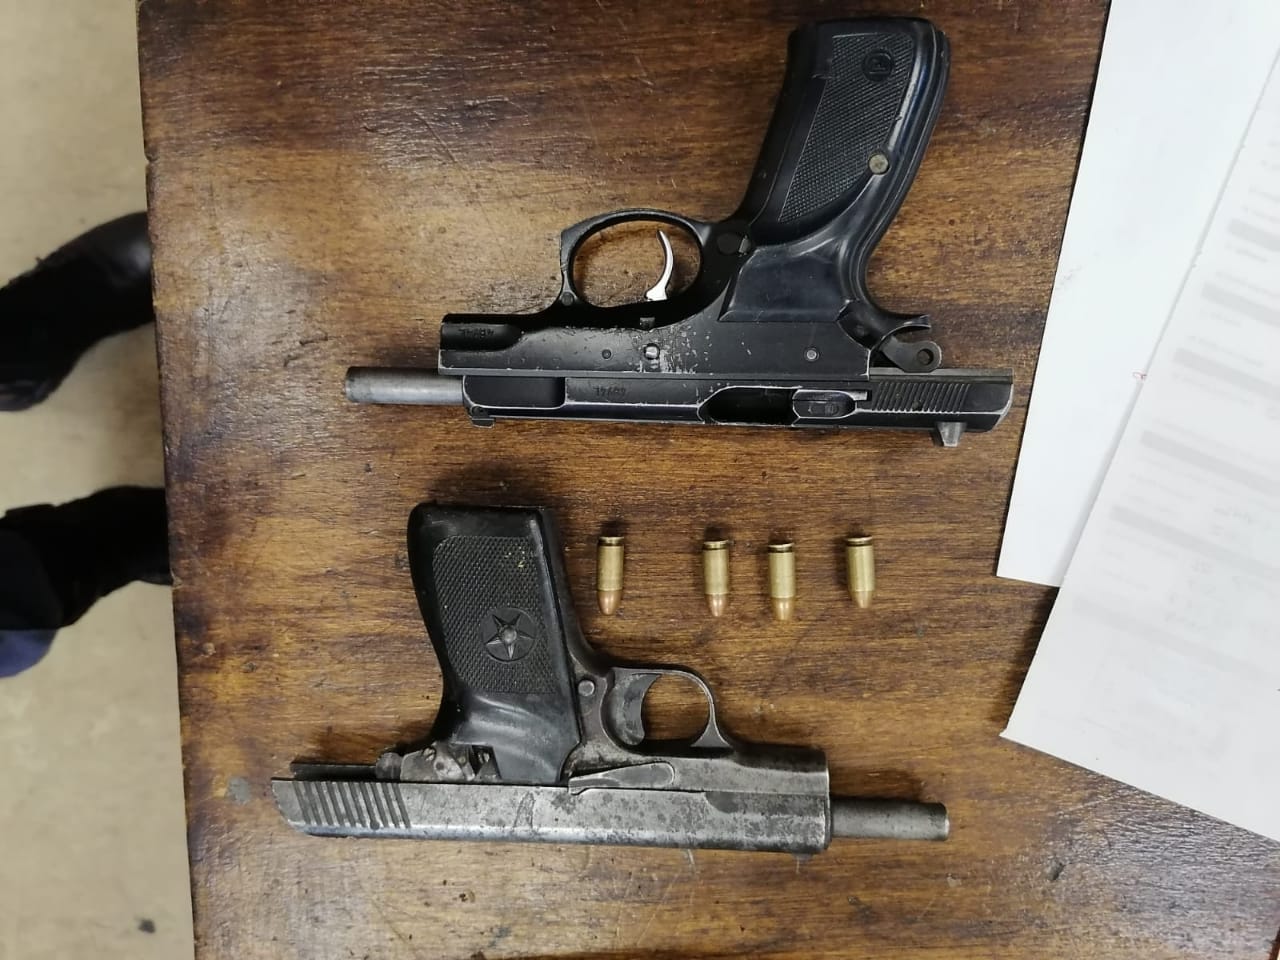 Two arrested in possession of illegal firearms